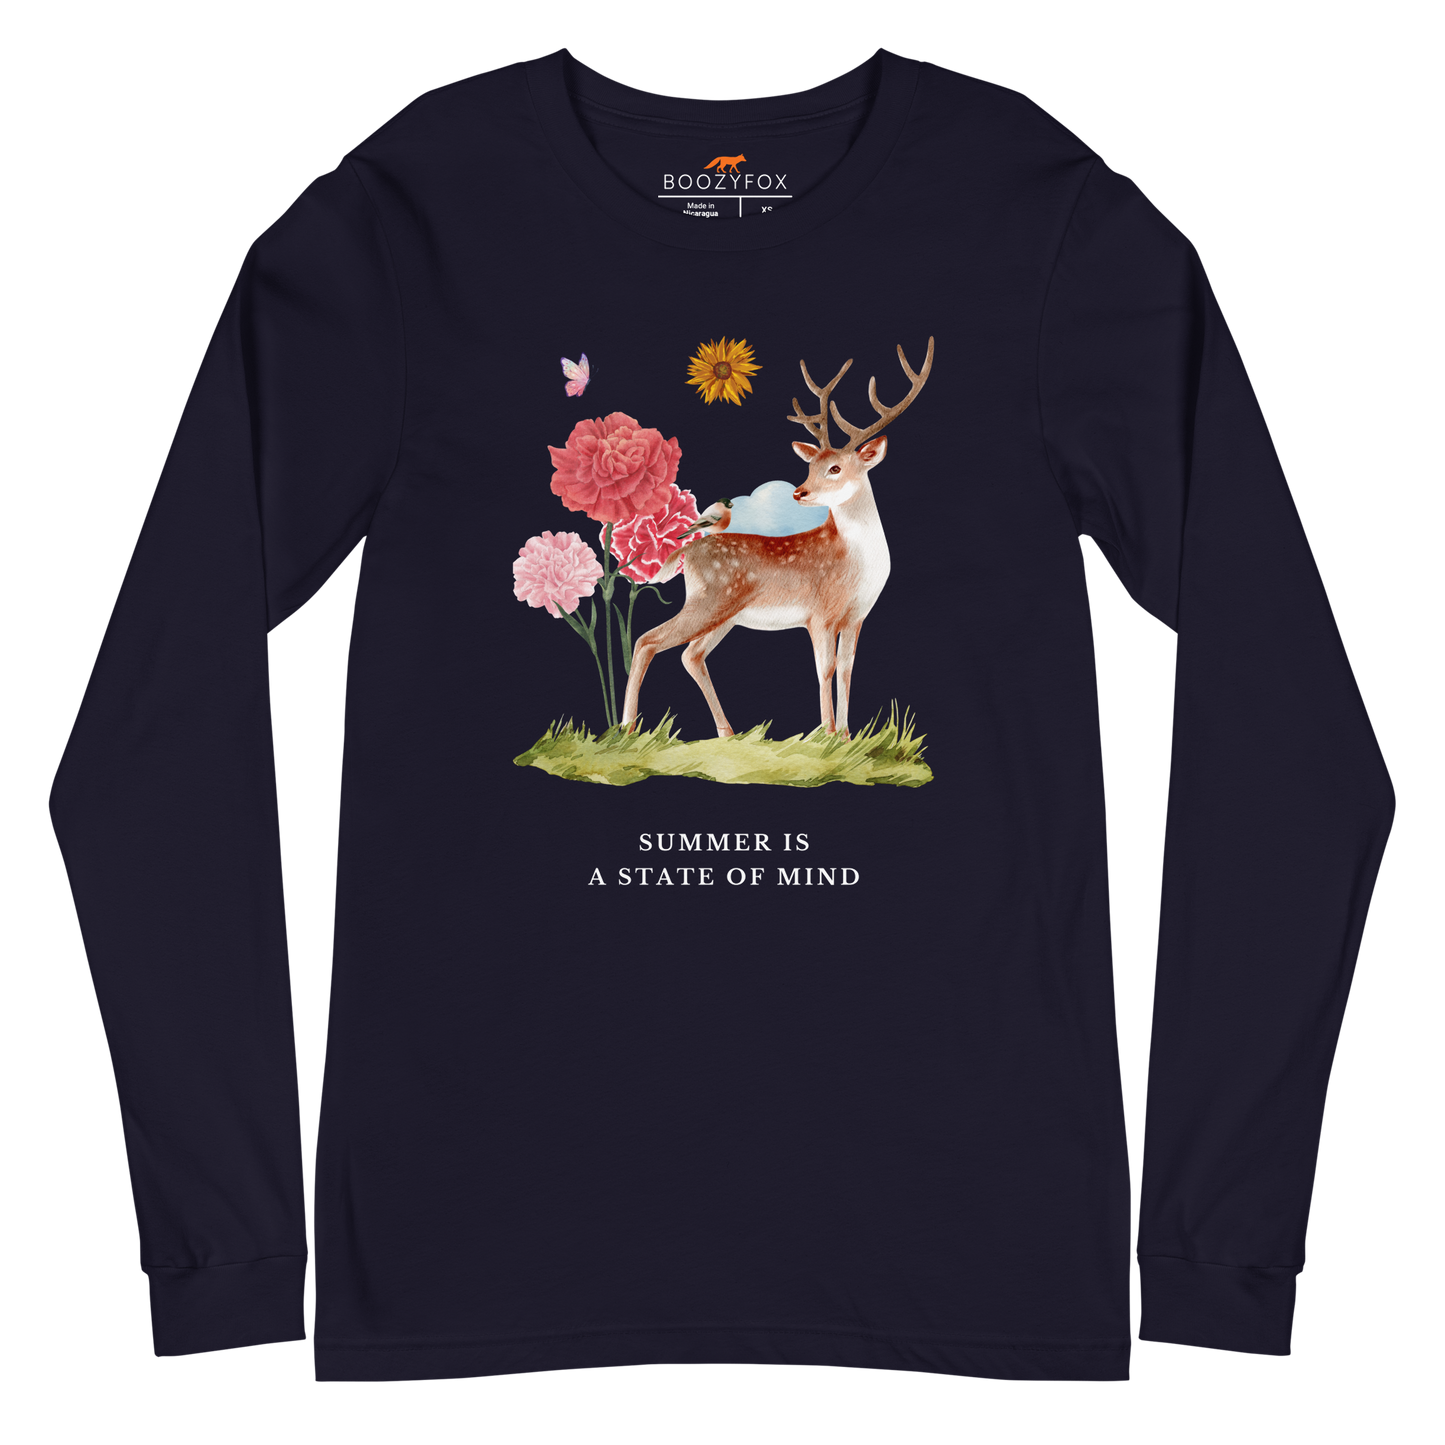 Navy Summer Is a State of Mind Long Sleeve Tee featuring a Summer Is a State of Mind graphic on the chest - Cute Summer Long Sleeve Graphic Tees - Boozy Fox